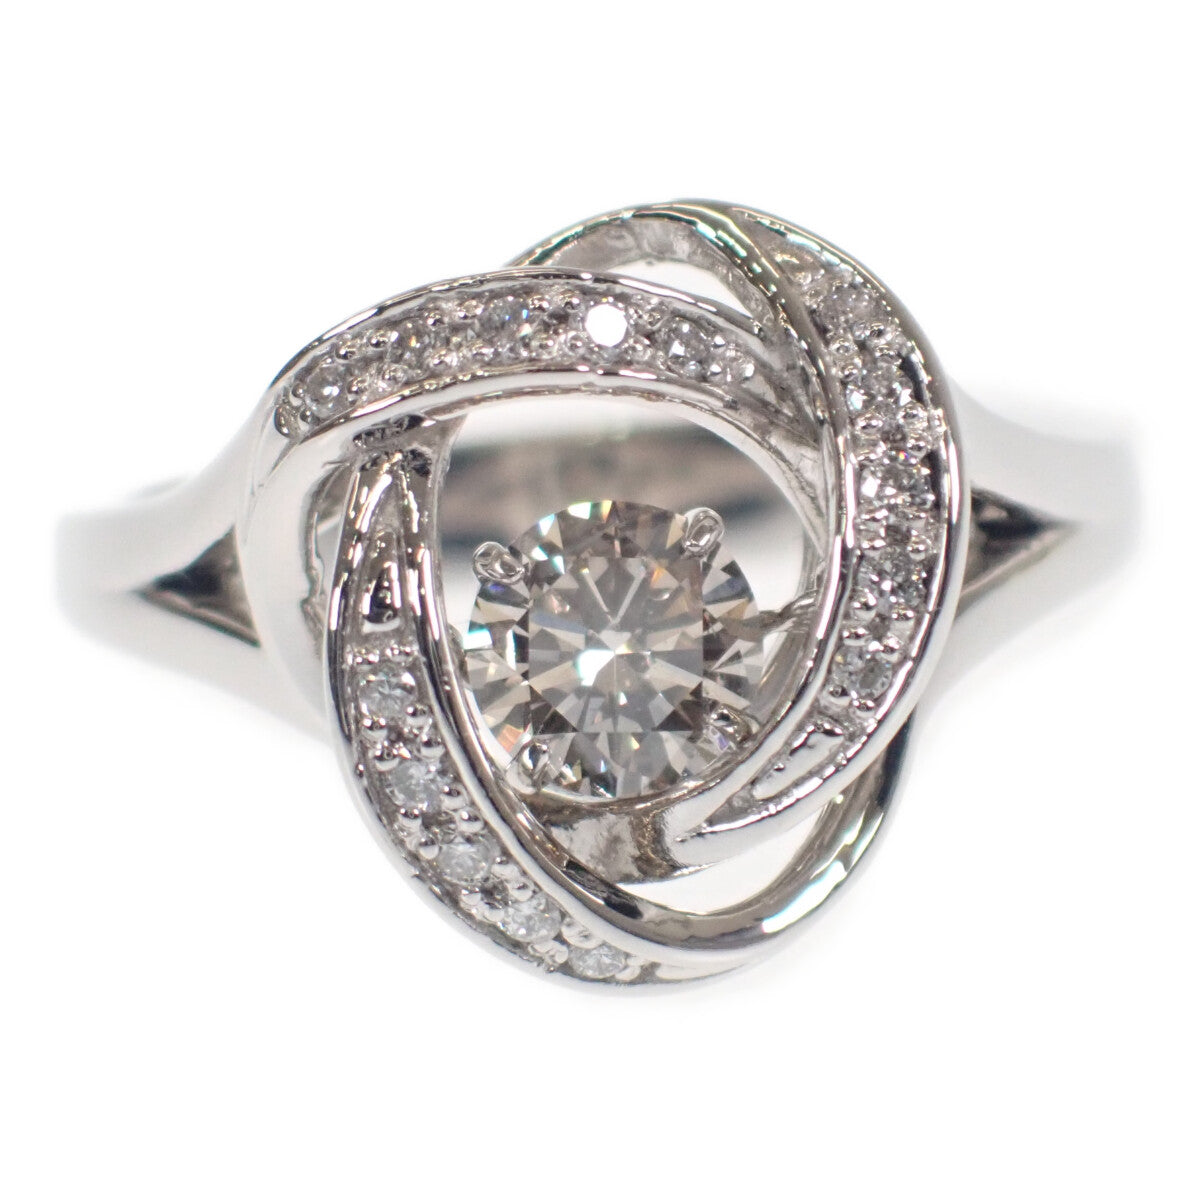 Designer Jewelry, Dancing Brown Diamond 0.417 0.08ct Ring in Platinum PT950 for Women, Size 12 (Used)